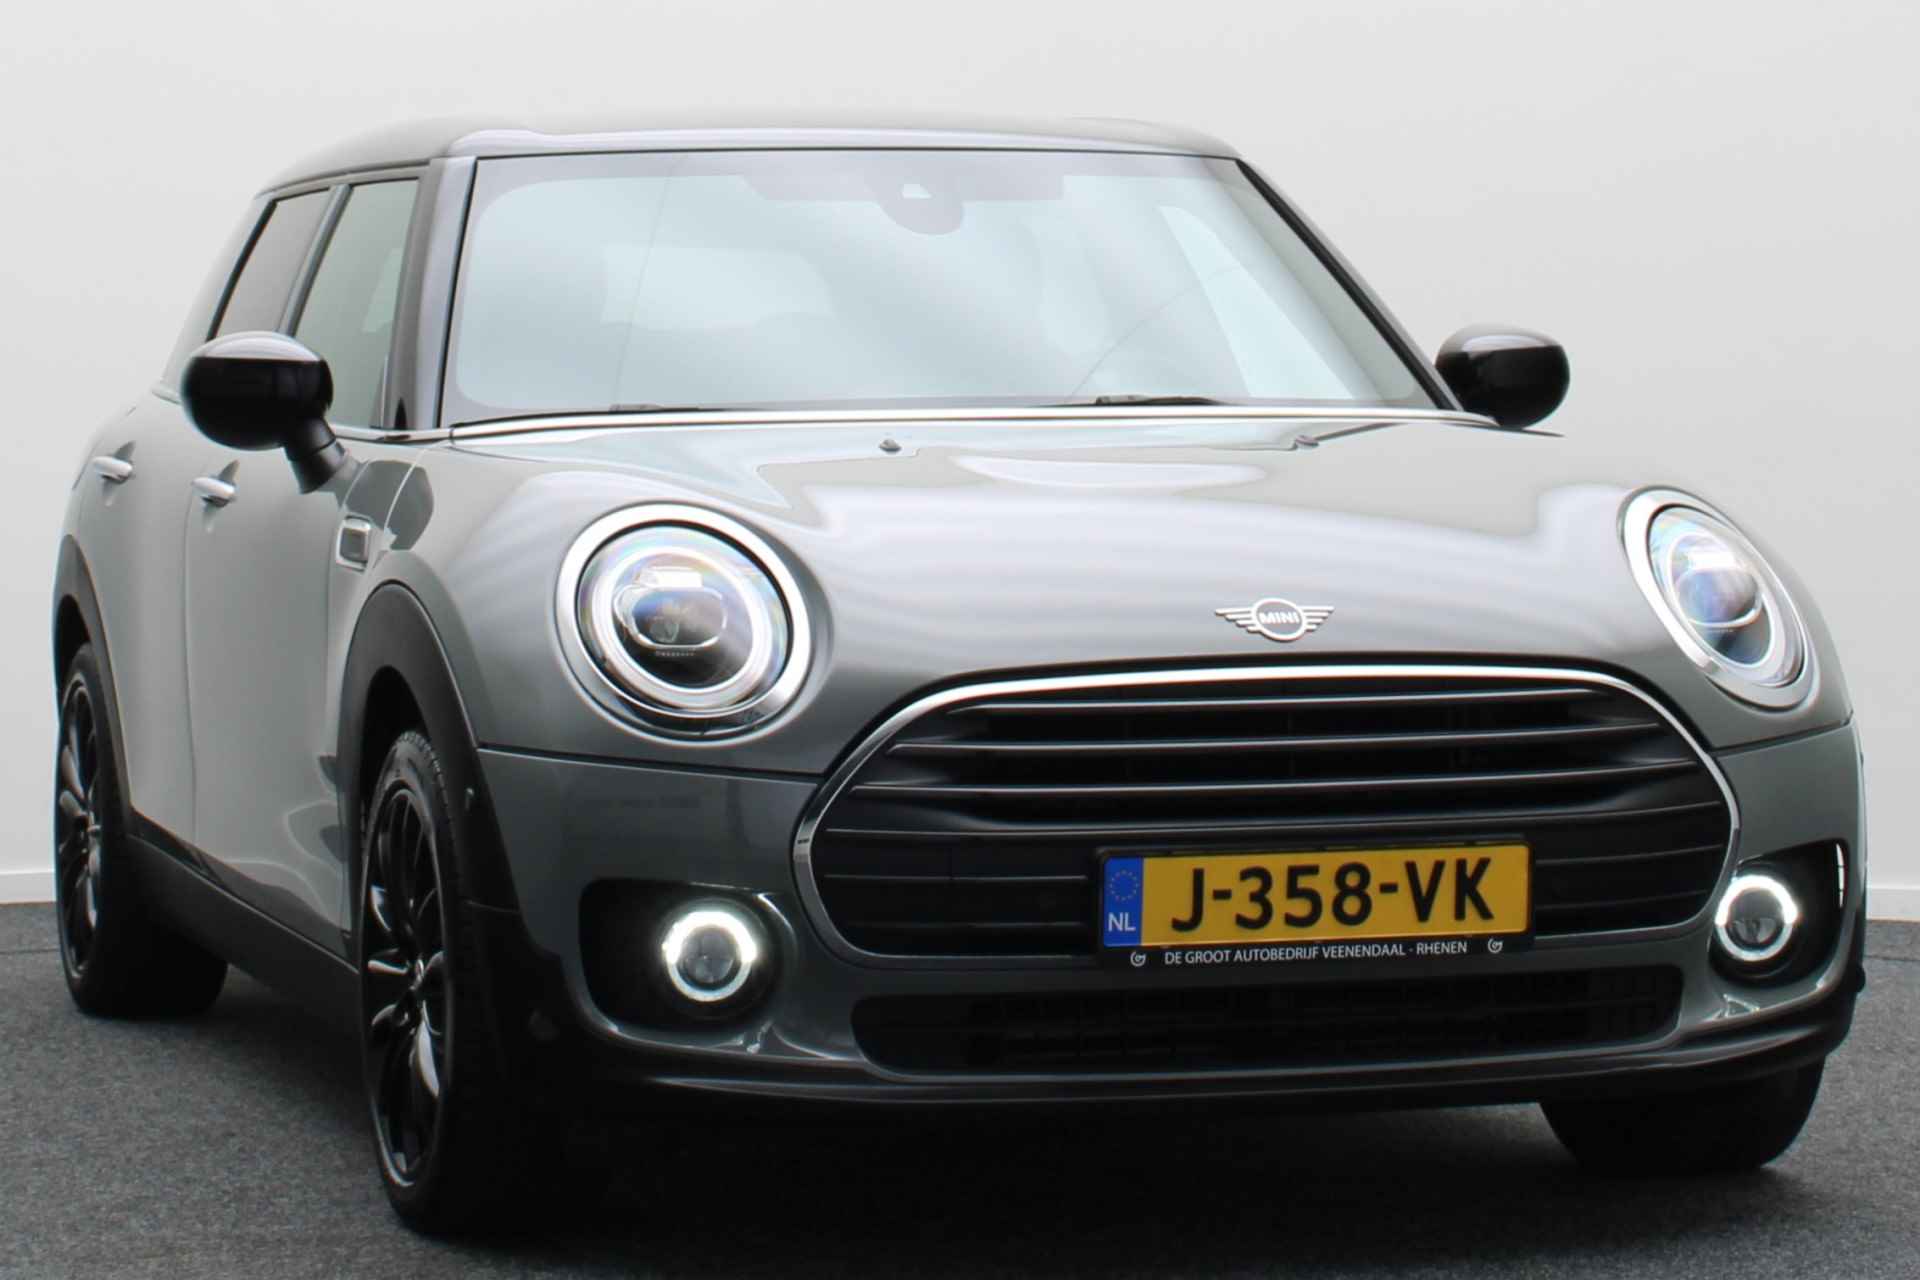 MINI Clubman 1.5 Cooper Business Edition Automaat LED, Keyless, Two-Tone lak, Navigatie, Cruise, PDC, Climate, 17” - 20/44